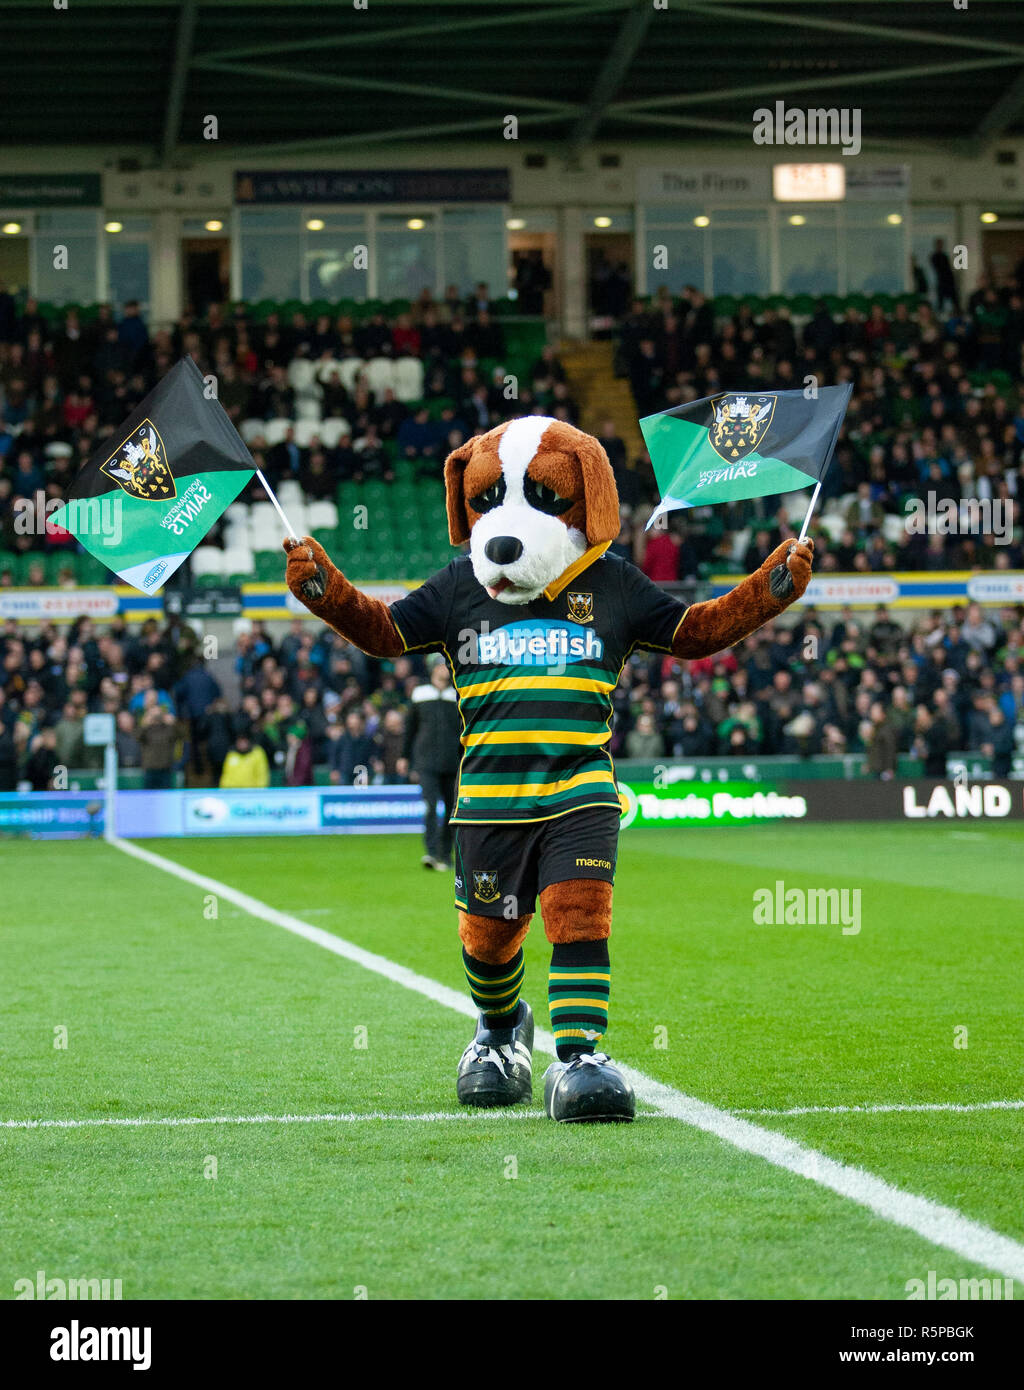 Northampton, UK. 1st December 2018. Northampton Saints mascot Bernie, ahead of the Gallagher Premiership Rugby match between Northampton Saints and Newcastle Falcons. Andrew Taylor/Alamy Live News Stock Photo